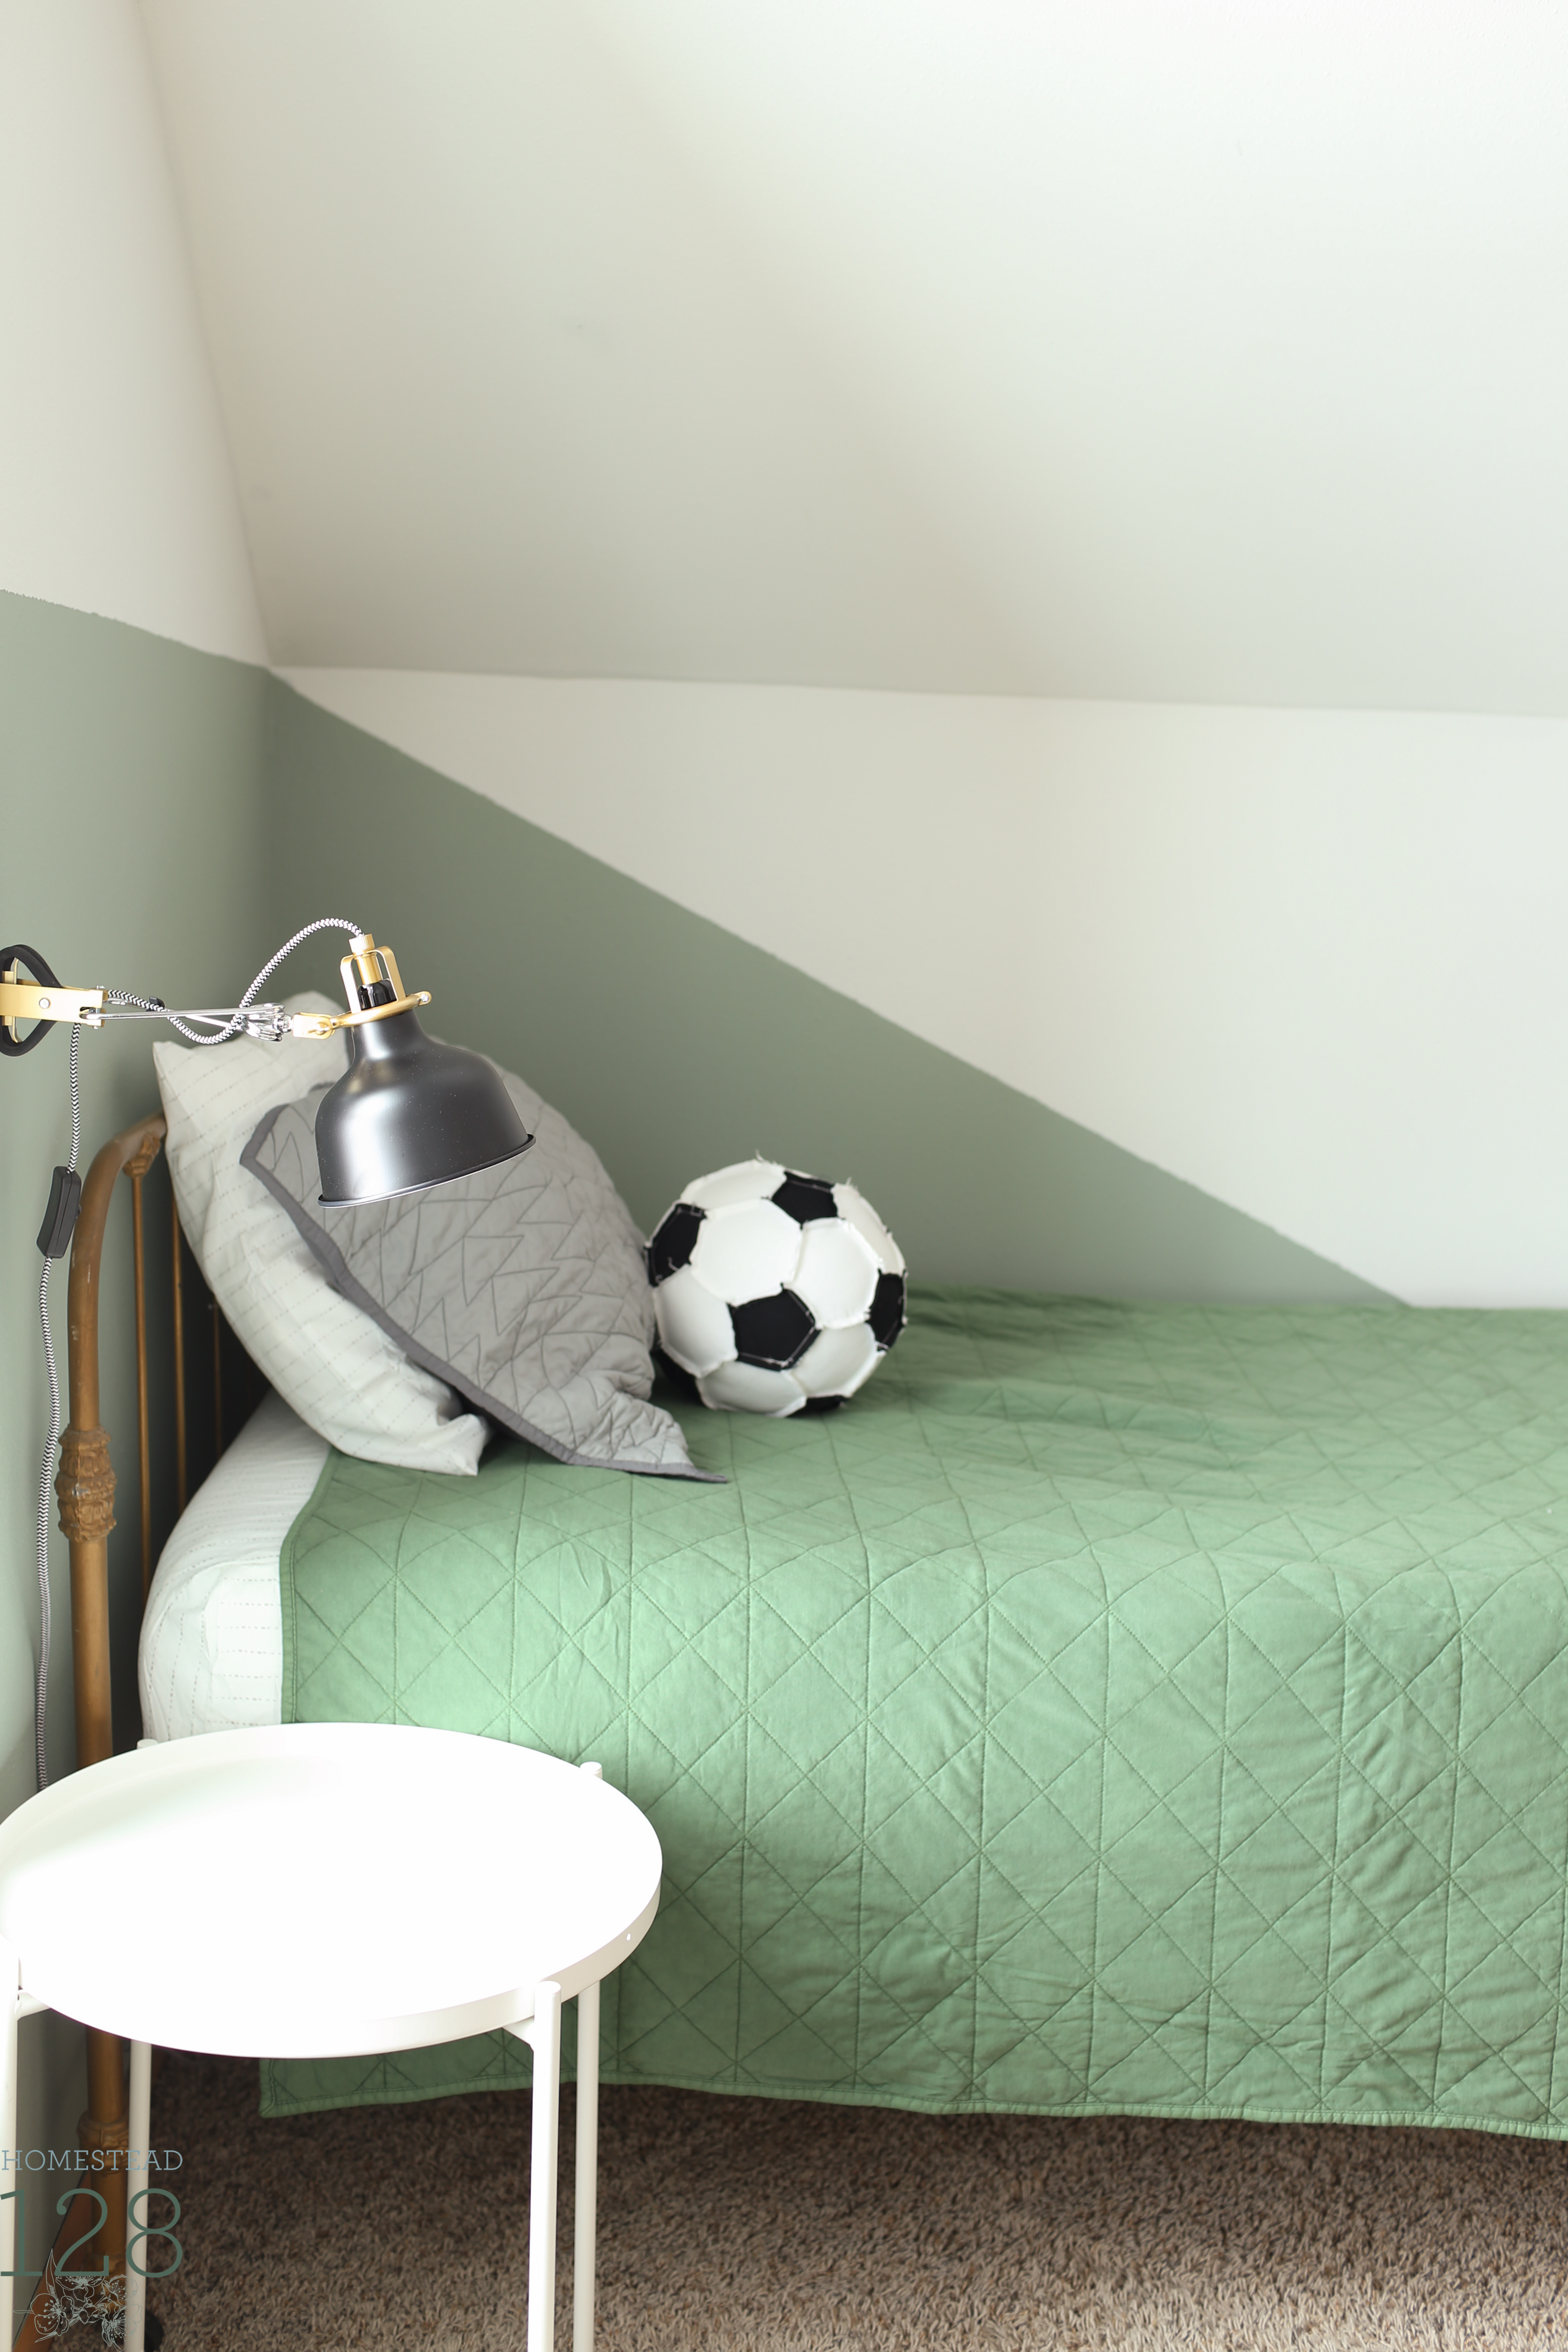 The boys vintage industrial shared bedroom brings in green, gray and white for a color scheme they can grow into.